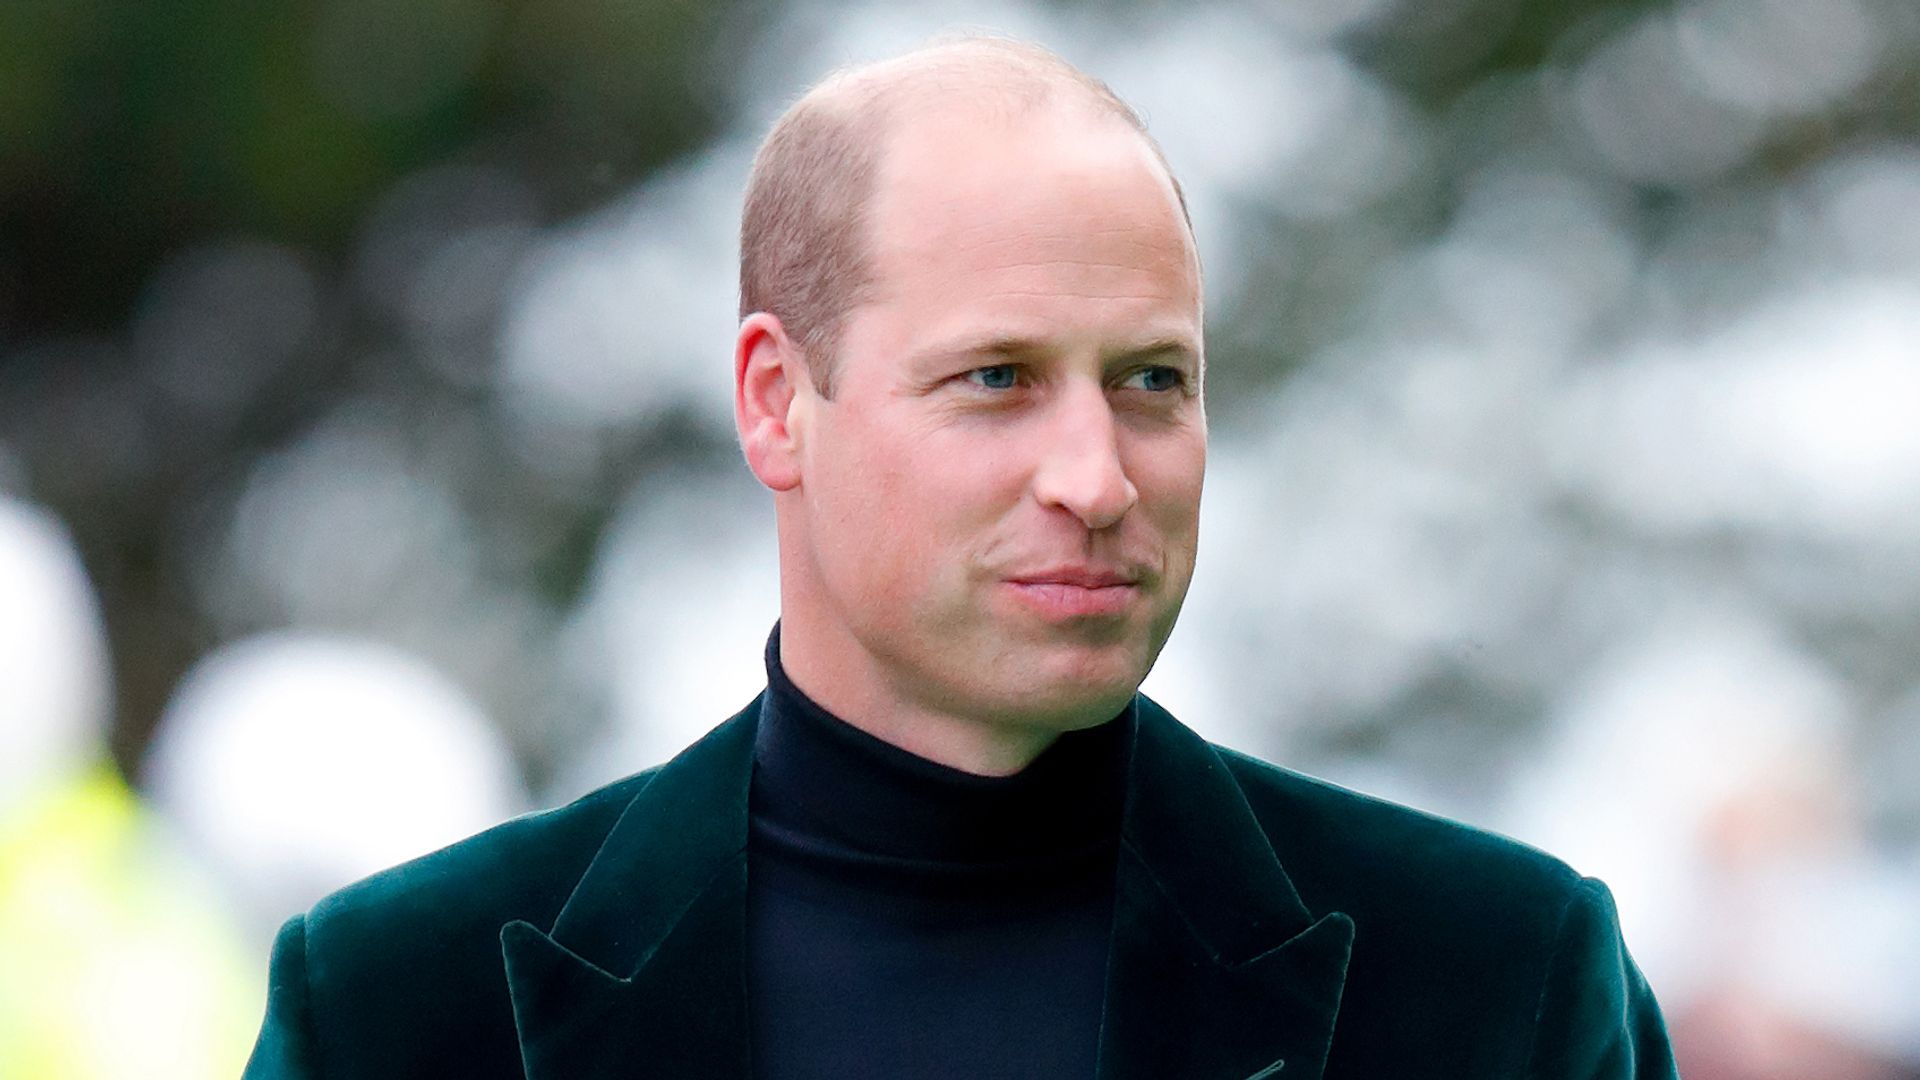 Prince William in a green suit